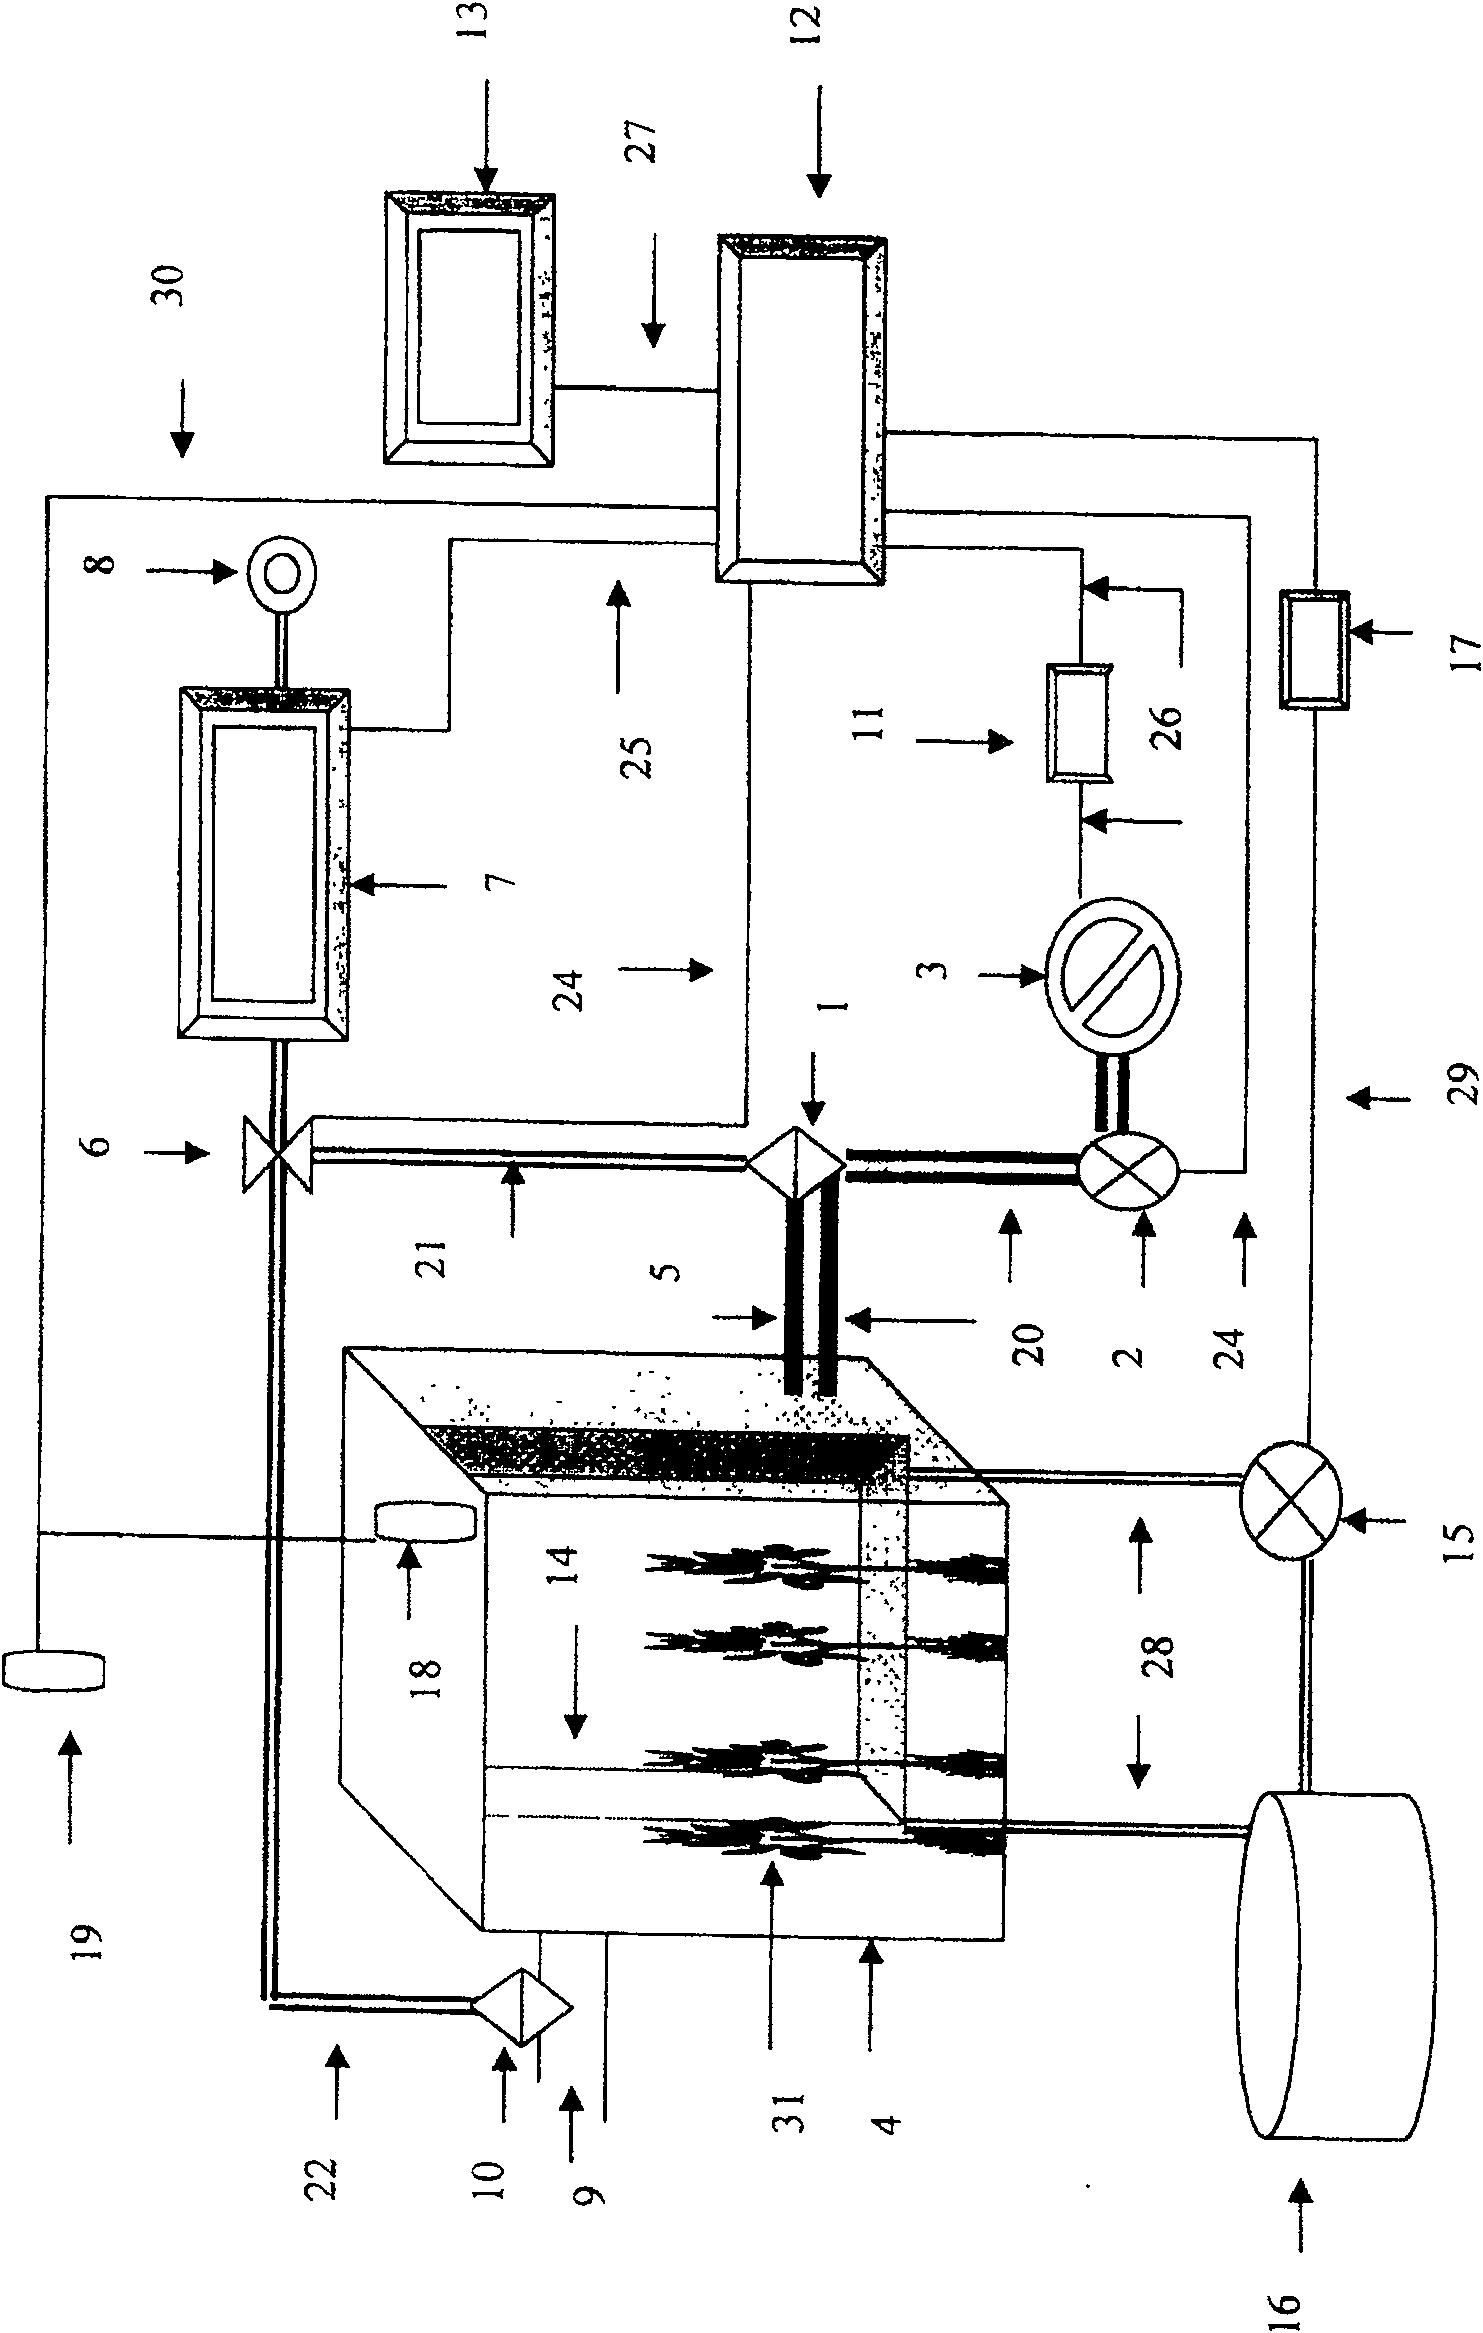 Apparatus and method for detecting capability of releasing/mounting COx by land ecosystem